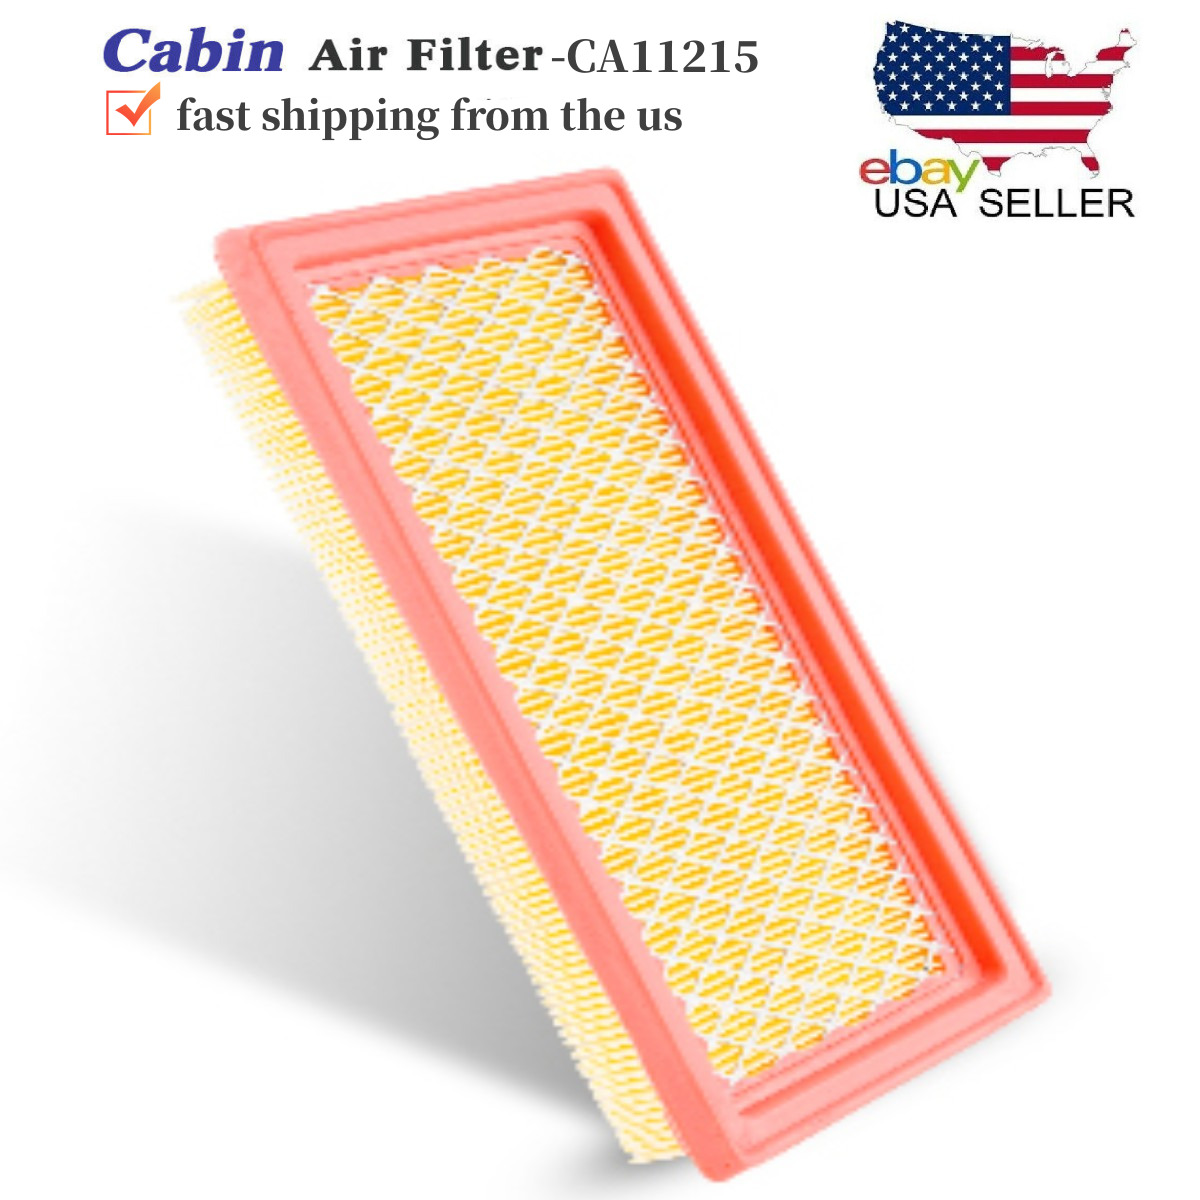 CA11215 engine Air Filter Replacement for Versa Note1.6L Engine, Micra 2015-2019